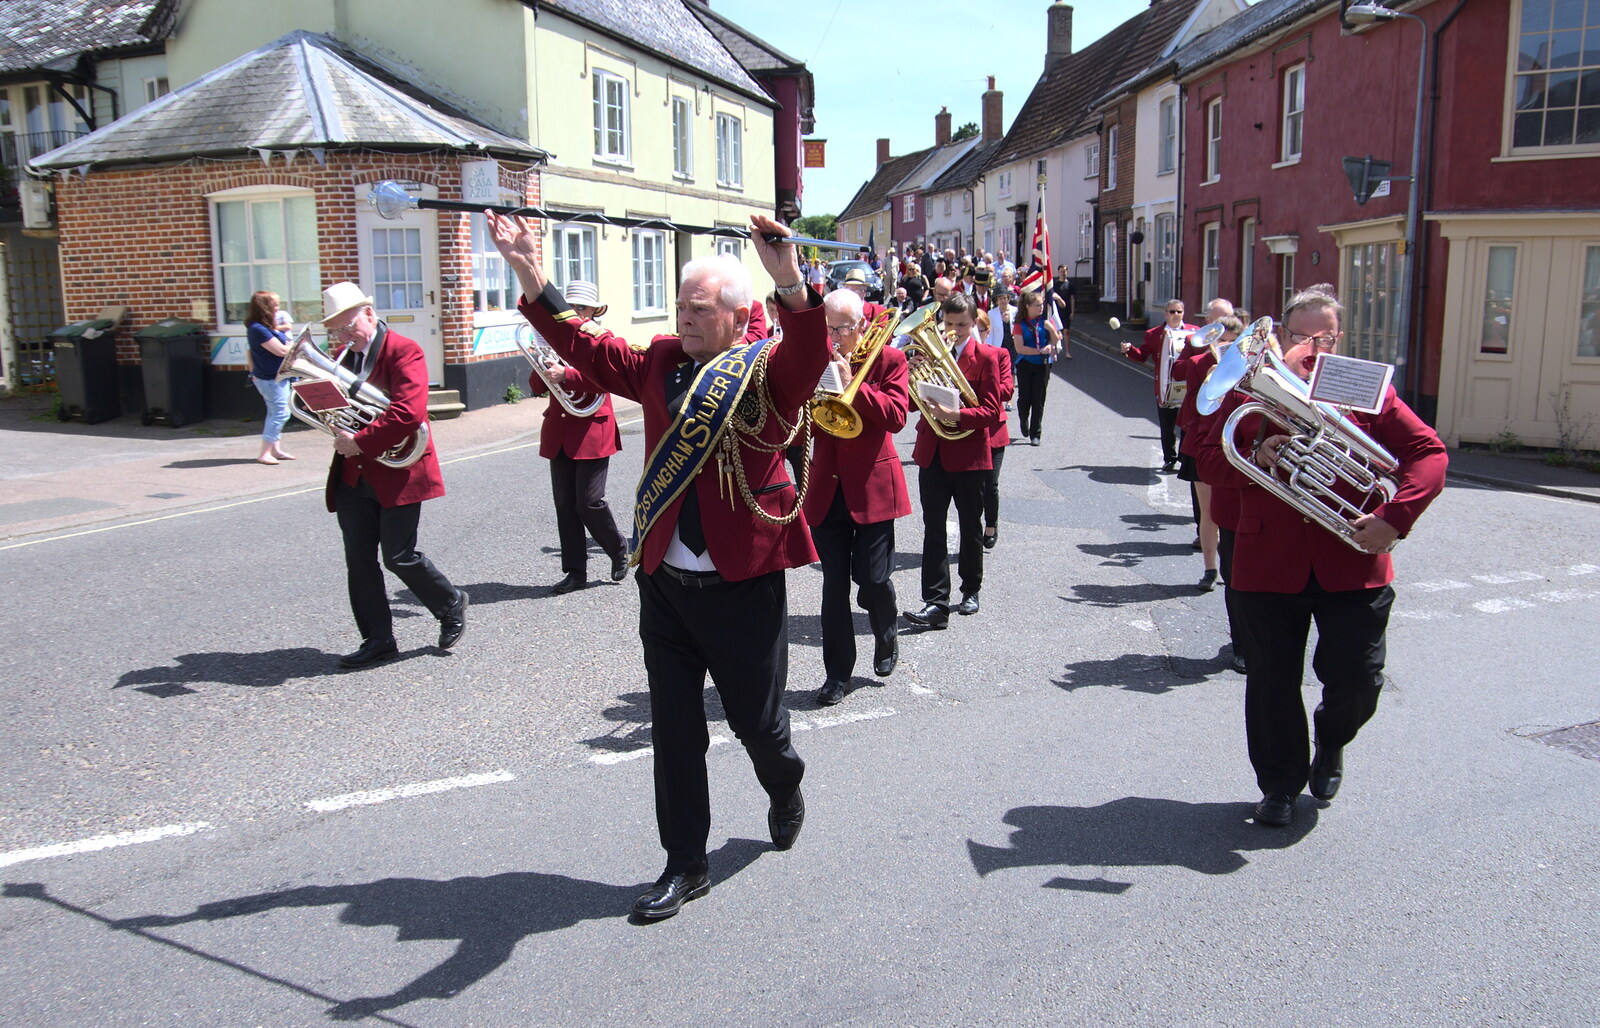 The band gets its freak on from The Mayor Making Parade, Eye, Suffolk - 24th June 2018